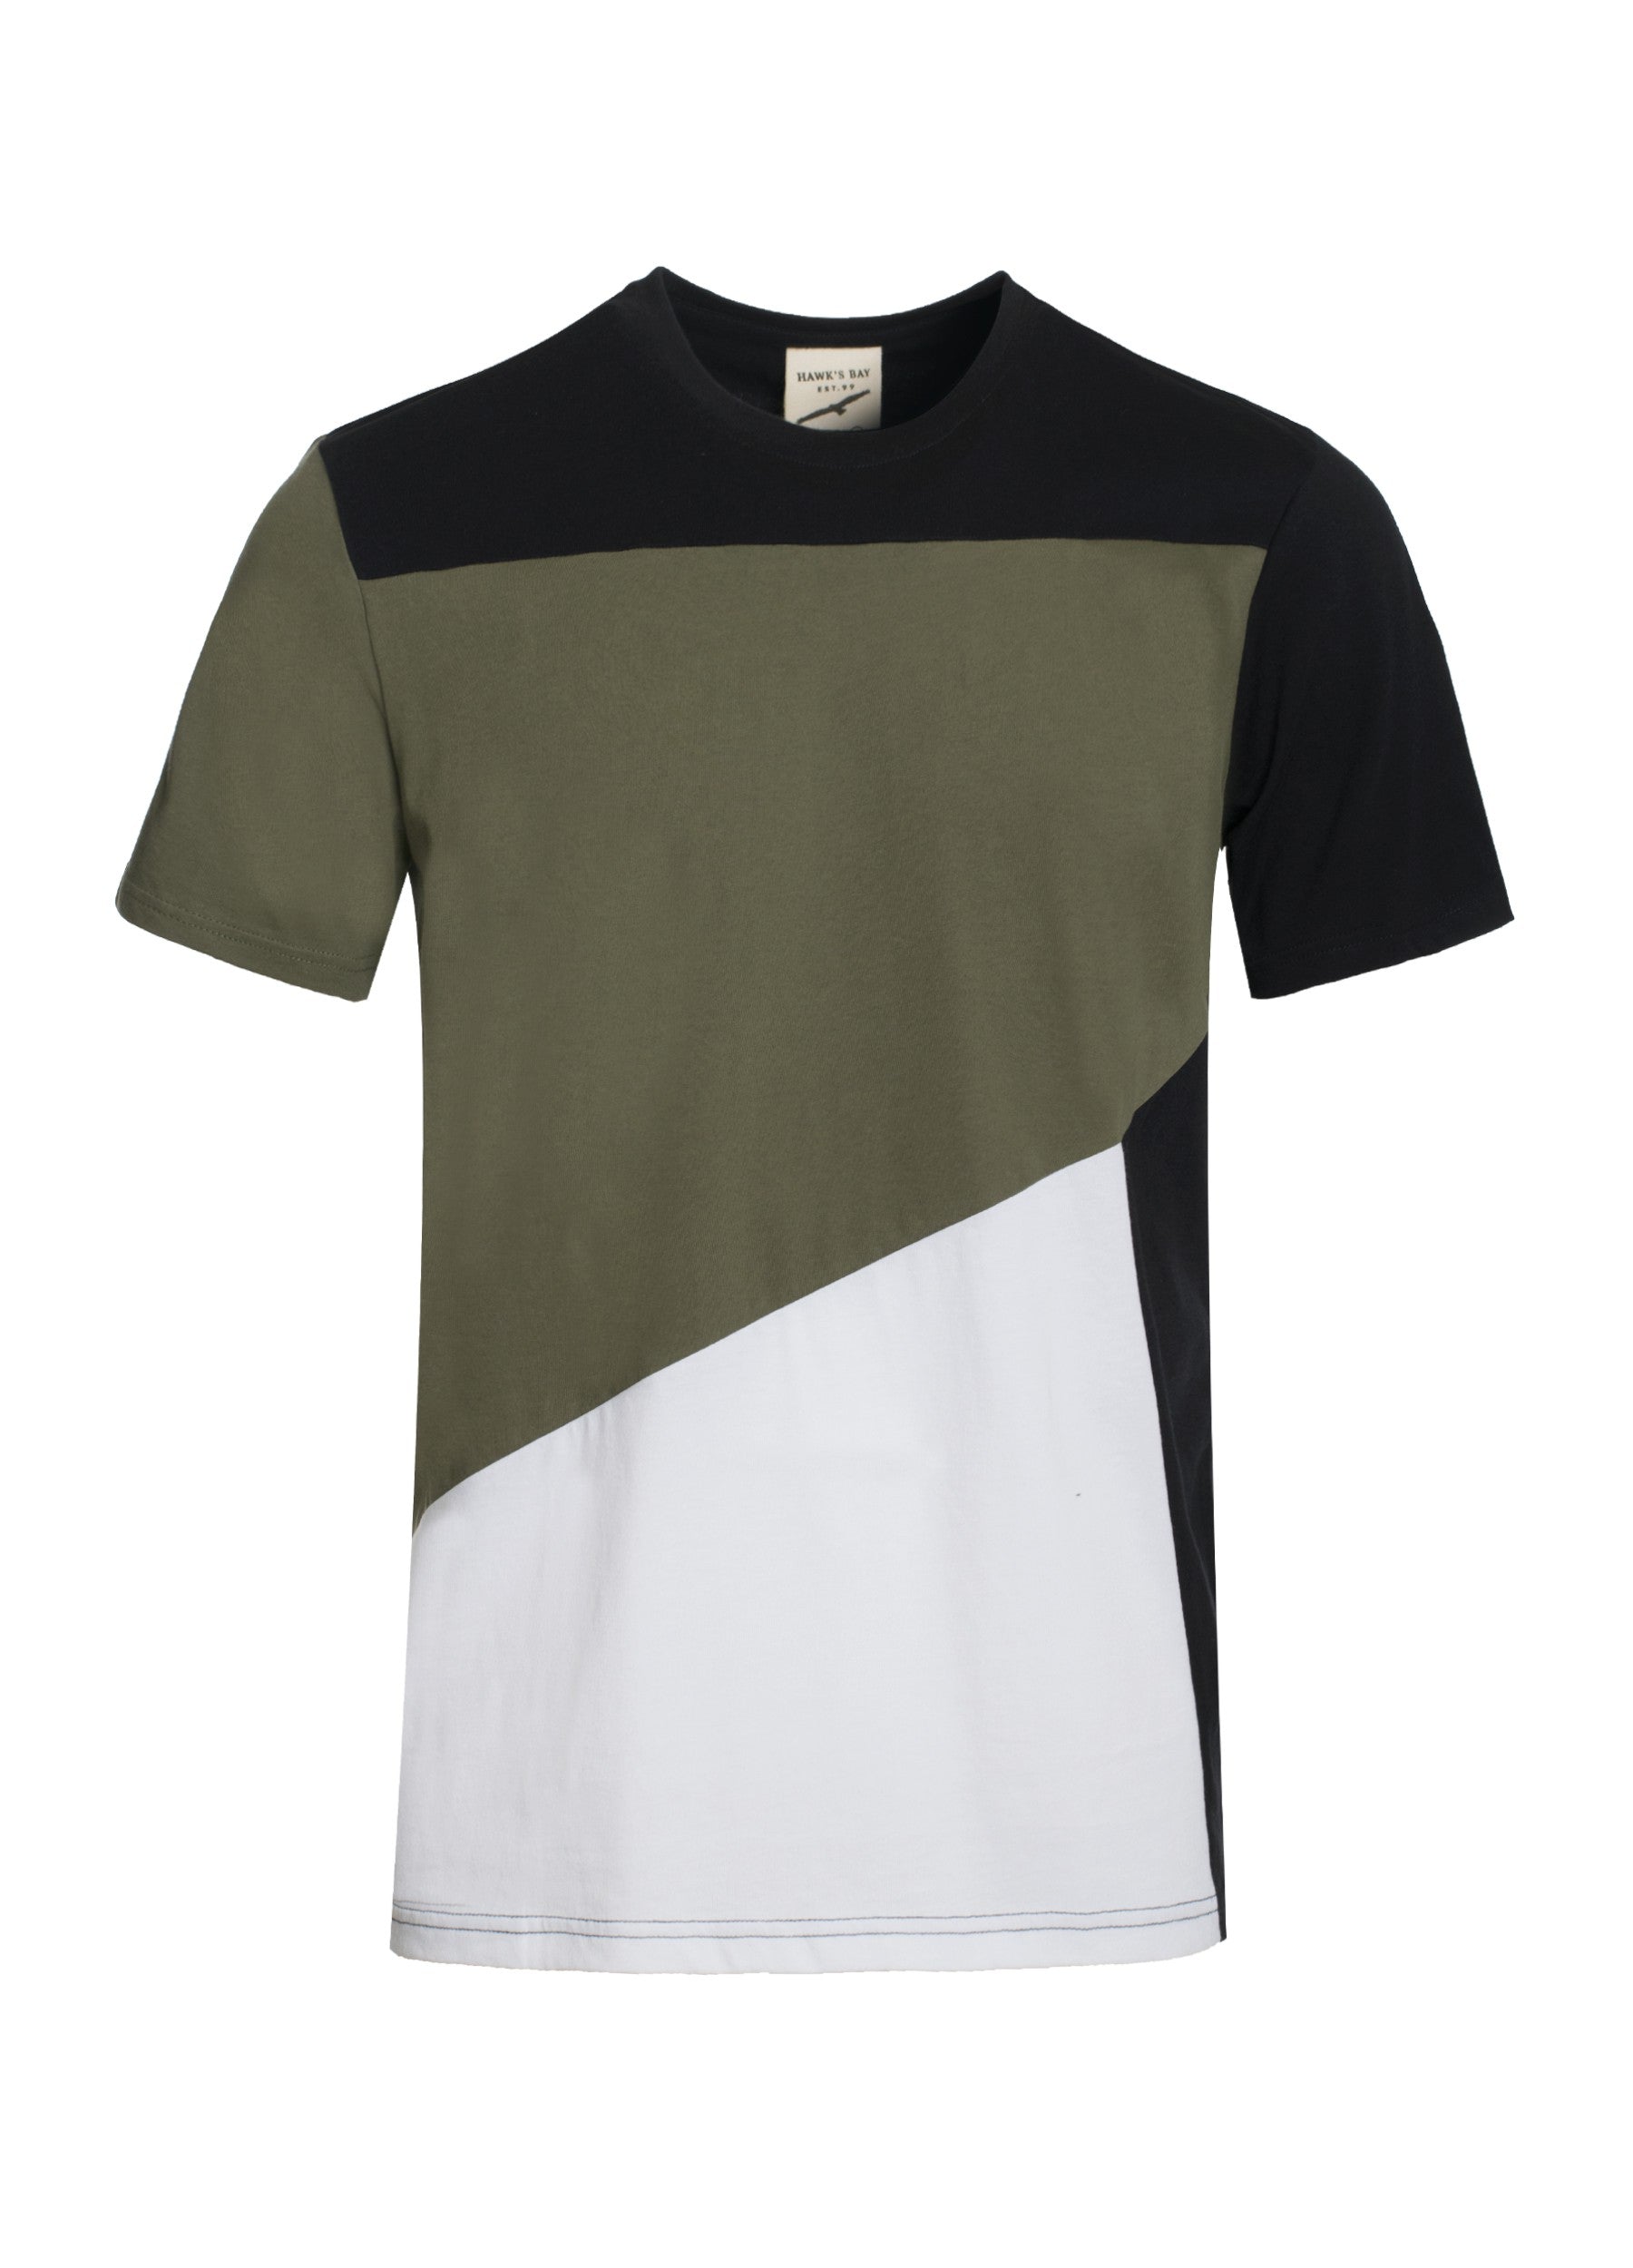 Olive Green Crew Neck Shirt - LURE Boutique